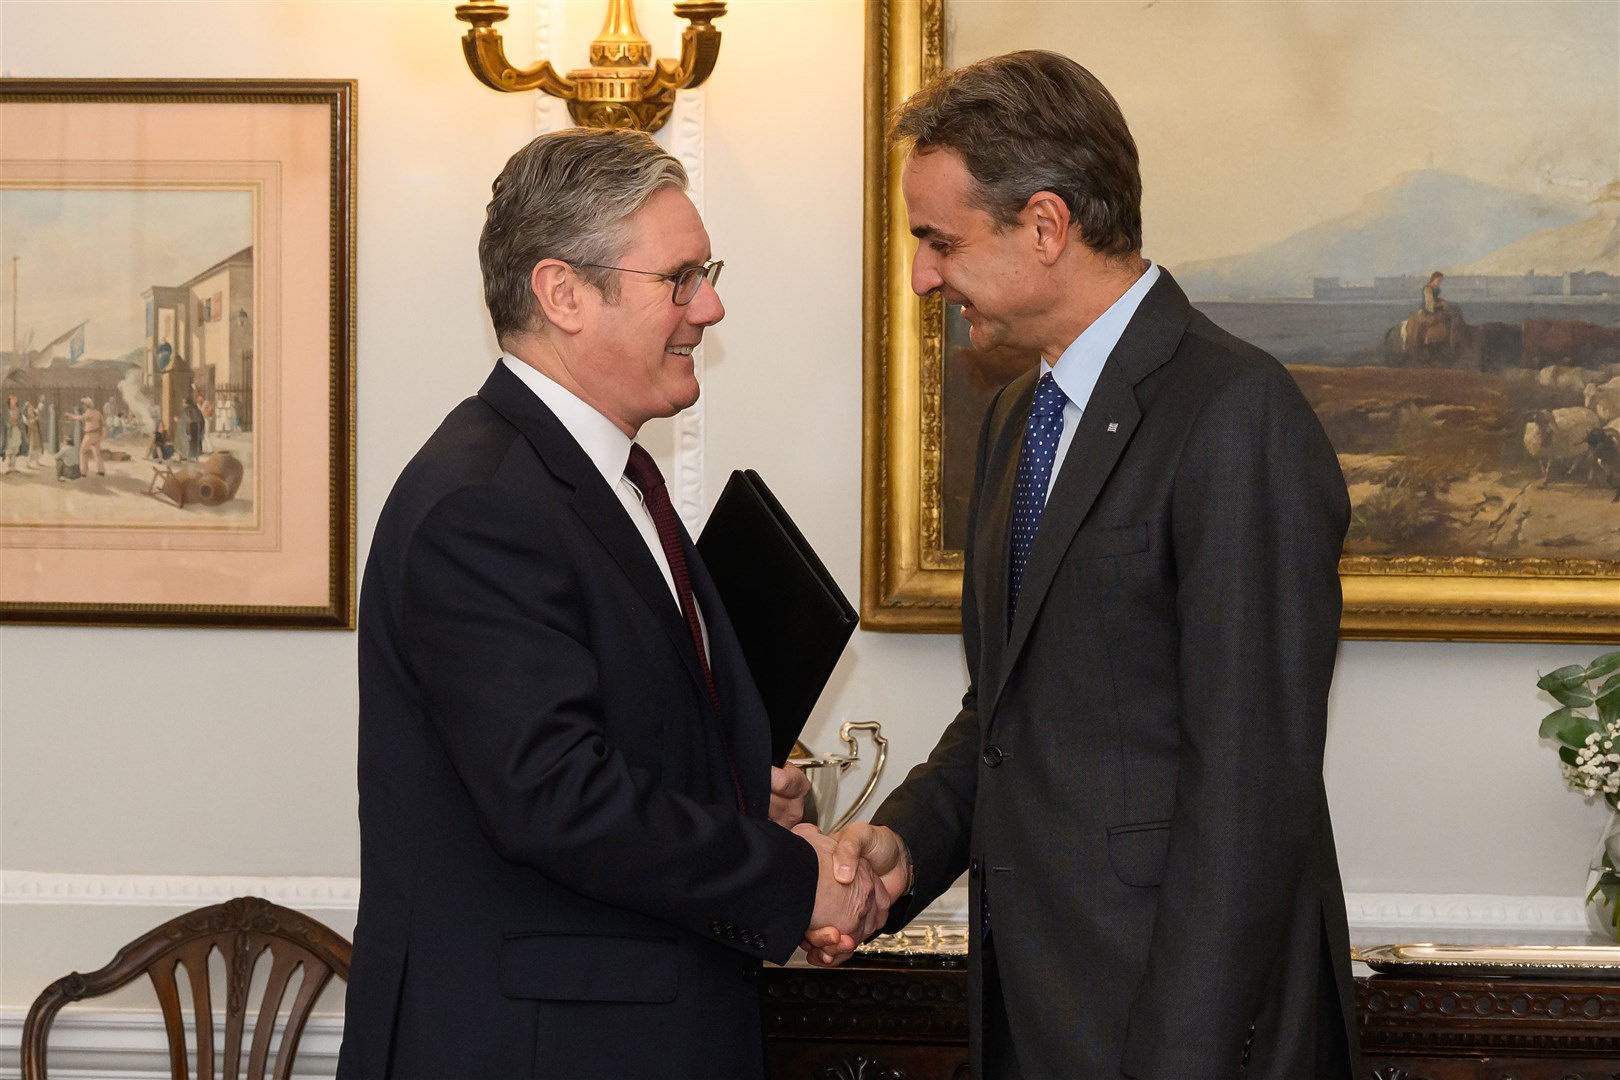 Labour Party leader Sir Keir Starmer met prime minister of Greece Kyriakos Mitsotakis during his trip to London (Leon Neal/PA)